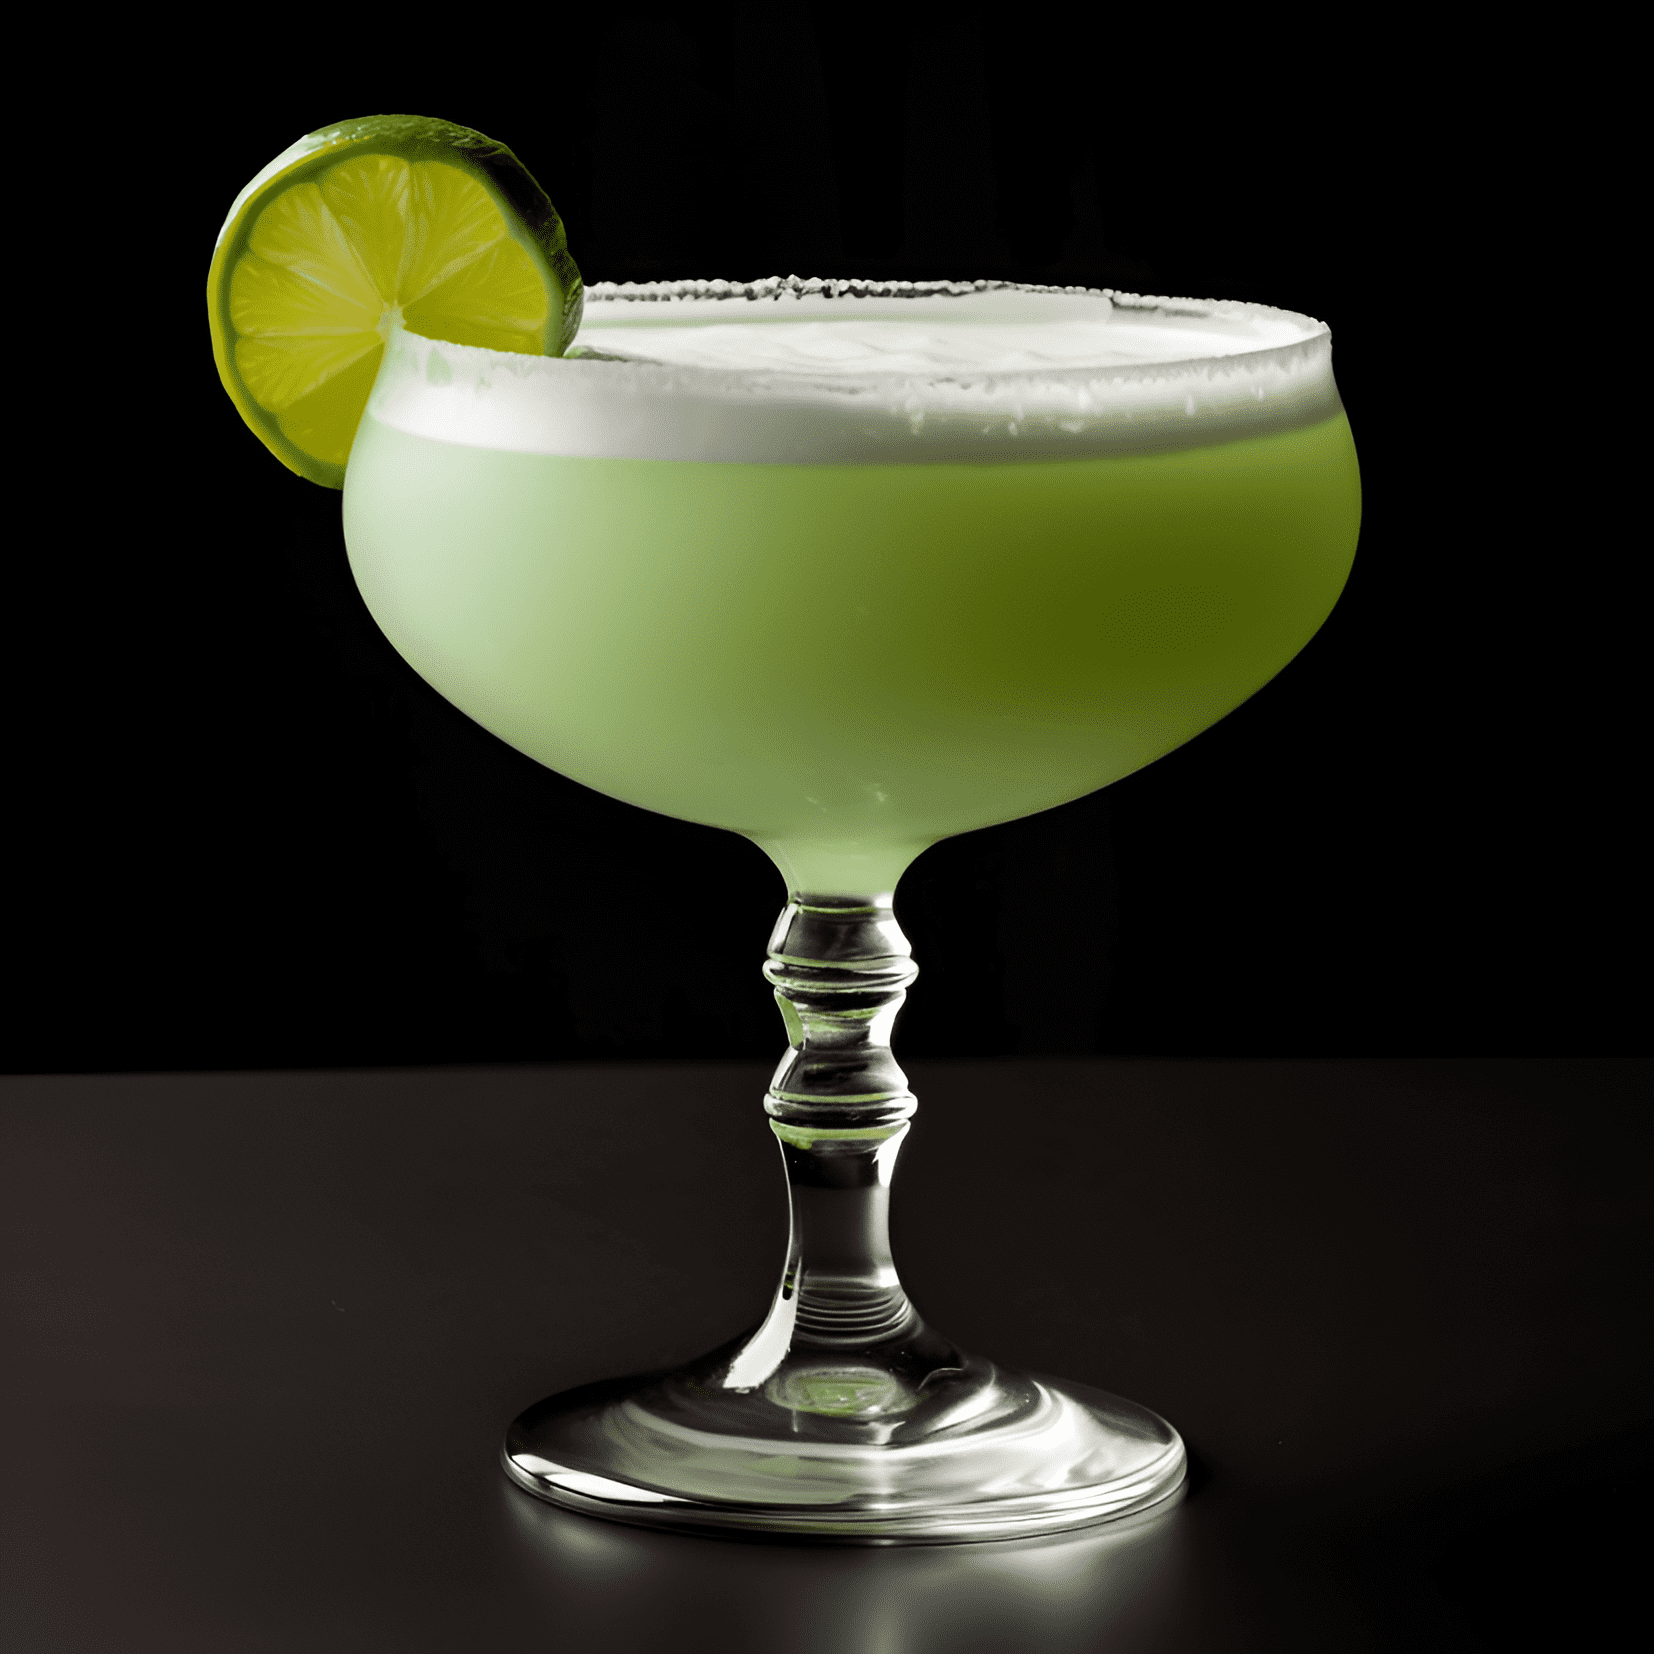 Lime Sour Cocktail Recipe - The Lime Sour is a tangy, zesty, and refreshing cocktail with a perfect balance of sweet and sour flavors. It has a light, crisp taste with a hint of bitterness from the lime, making it an ideal choice for those who enjoy a more complex flavor profile.